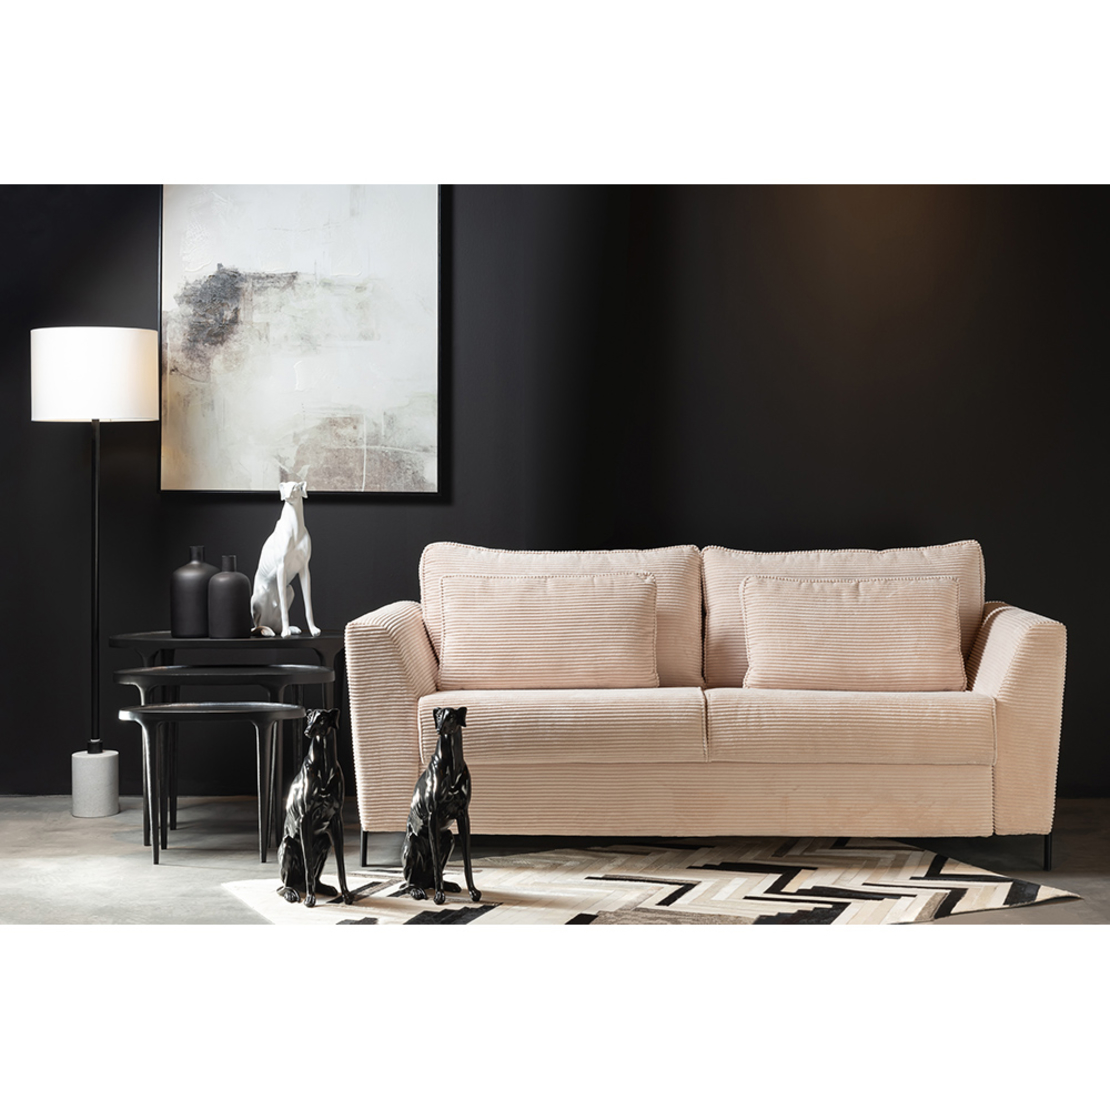 COCOON SOFA BED 3SEAT EASY CLEAN FABRIC BEIGE E1 E